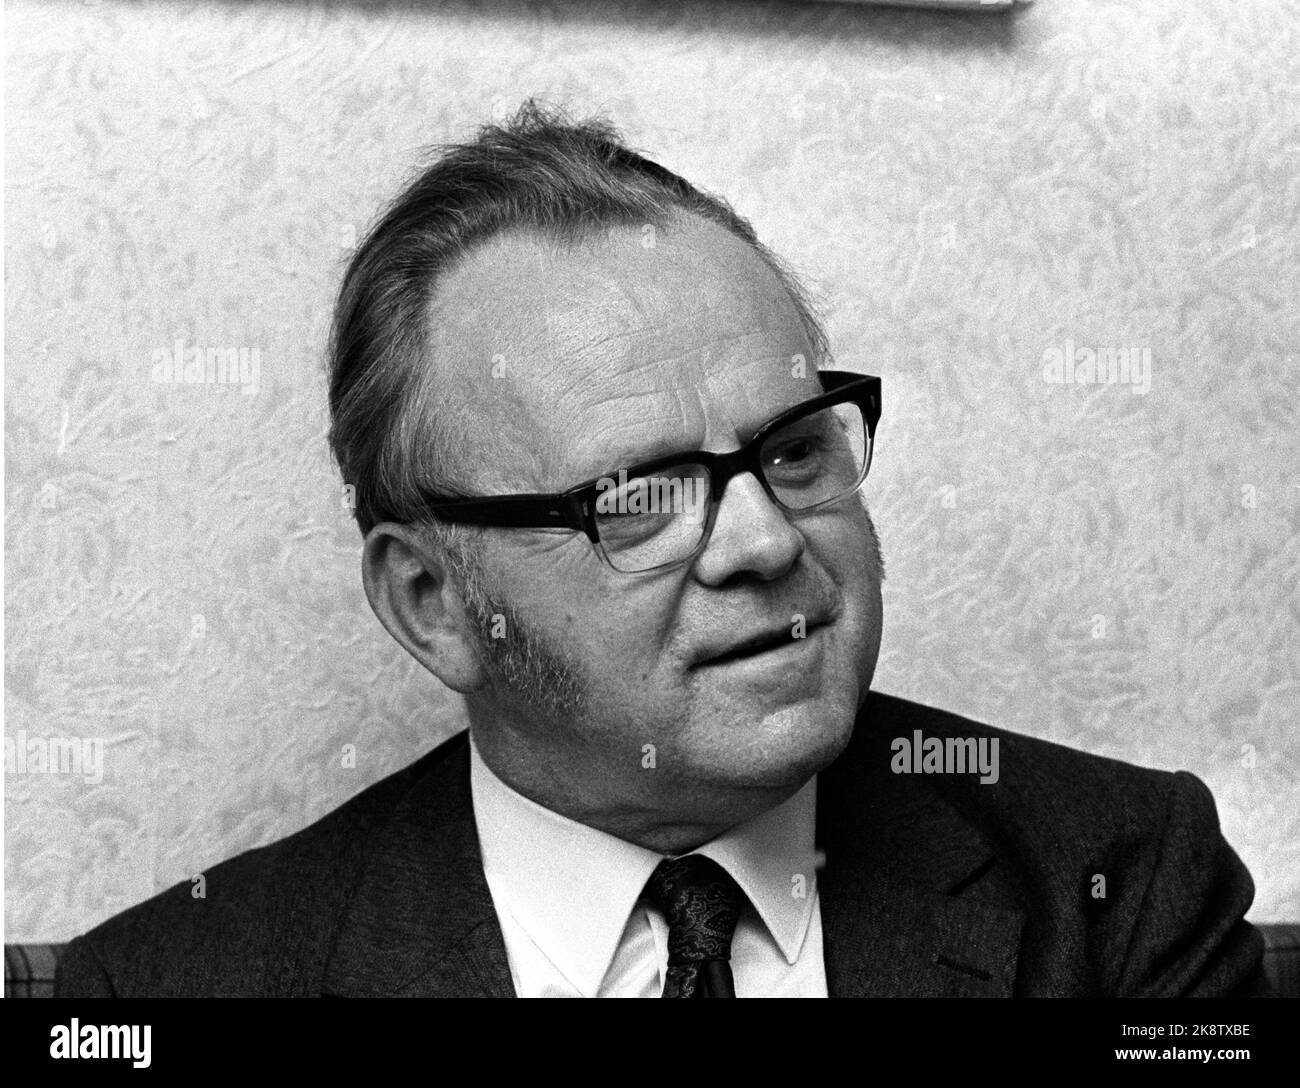 Oslo 19710706 Sverre Hartmann, lawyer, author and state fellow in history. Interview situation. Photo: Hordnes / NTB / NTB Stock Photo